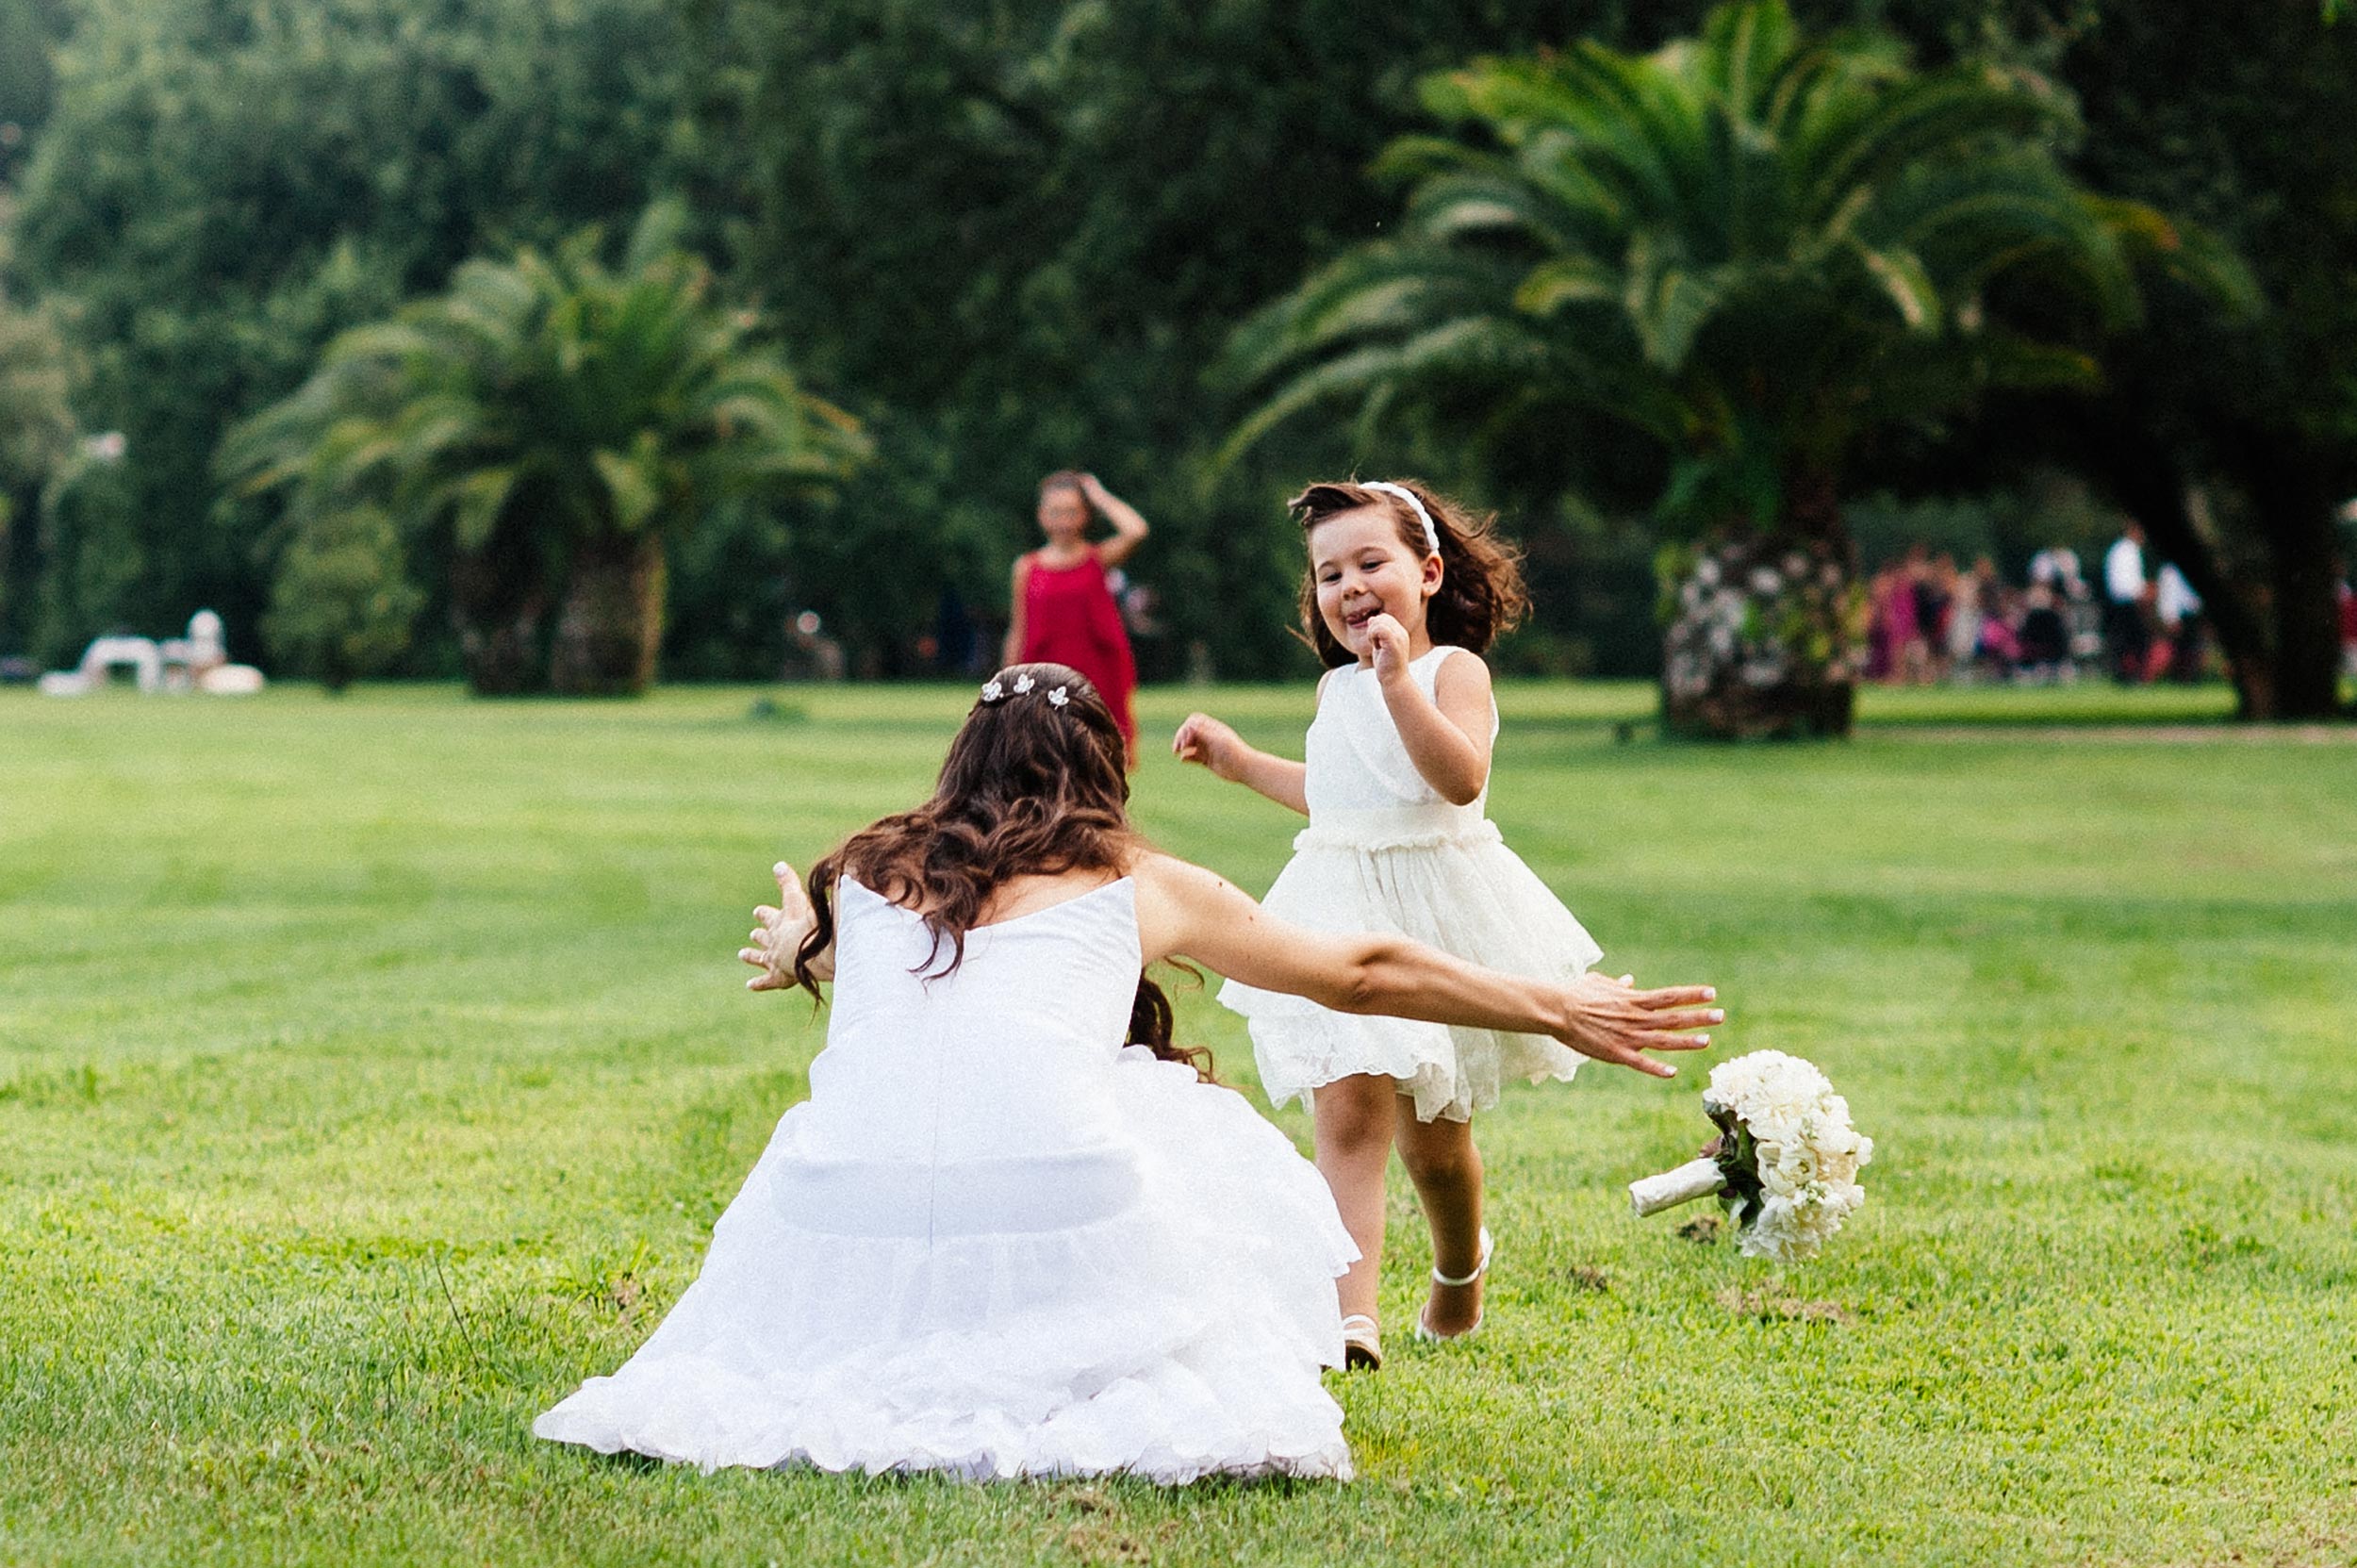 girl-runs-in-front-of-the-bride-and-she-drops-the-bouqut.jpg